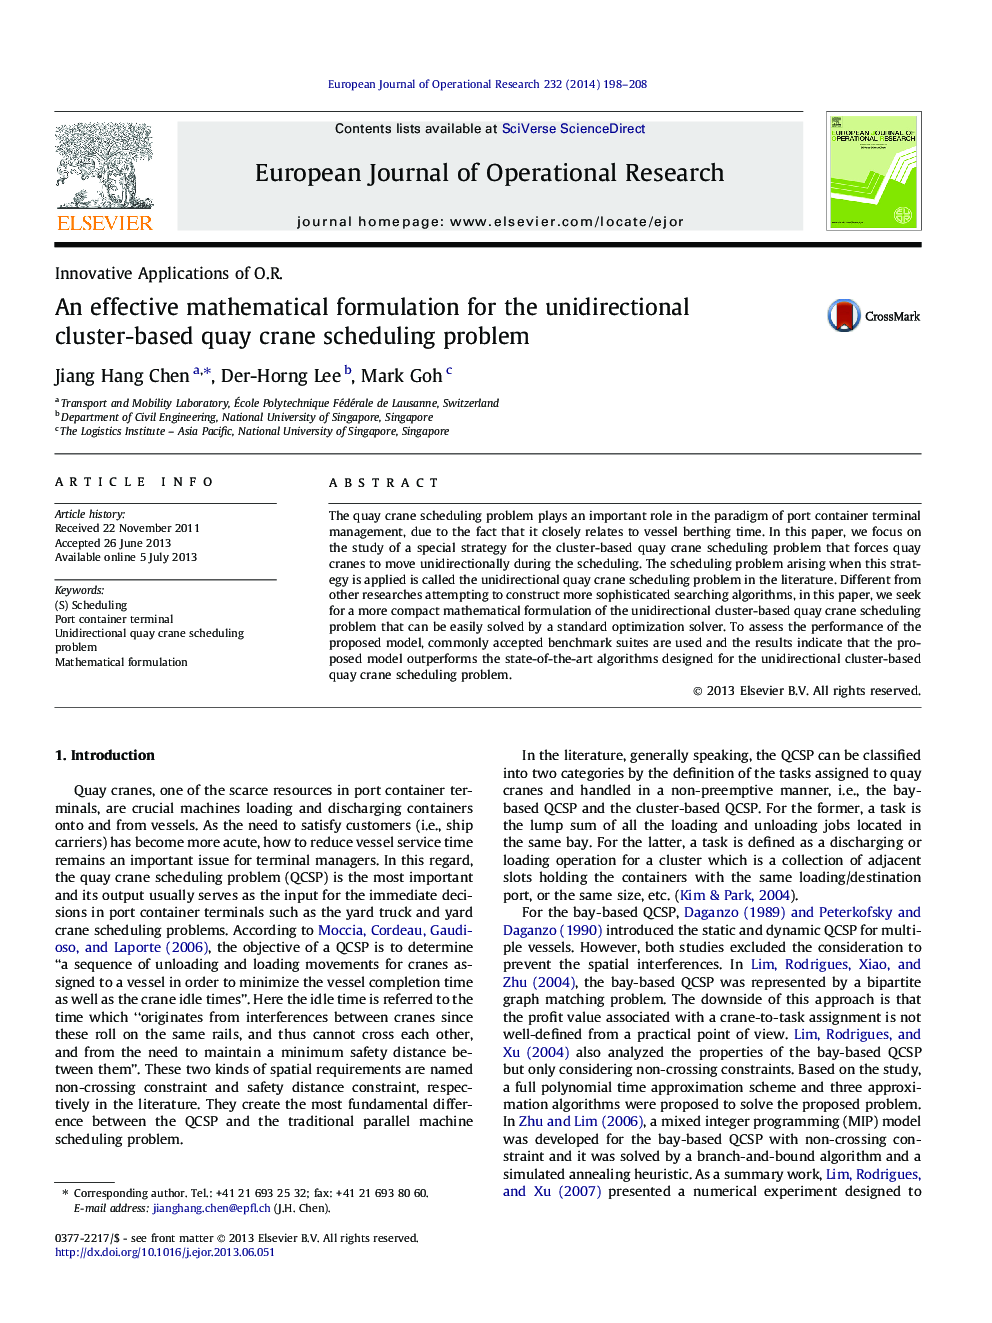 An effective mathematical formulation for the unidirectional cluster-based quay crane scheduling problem